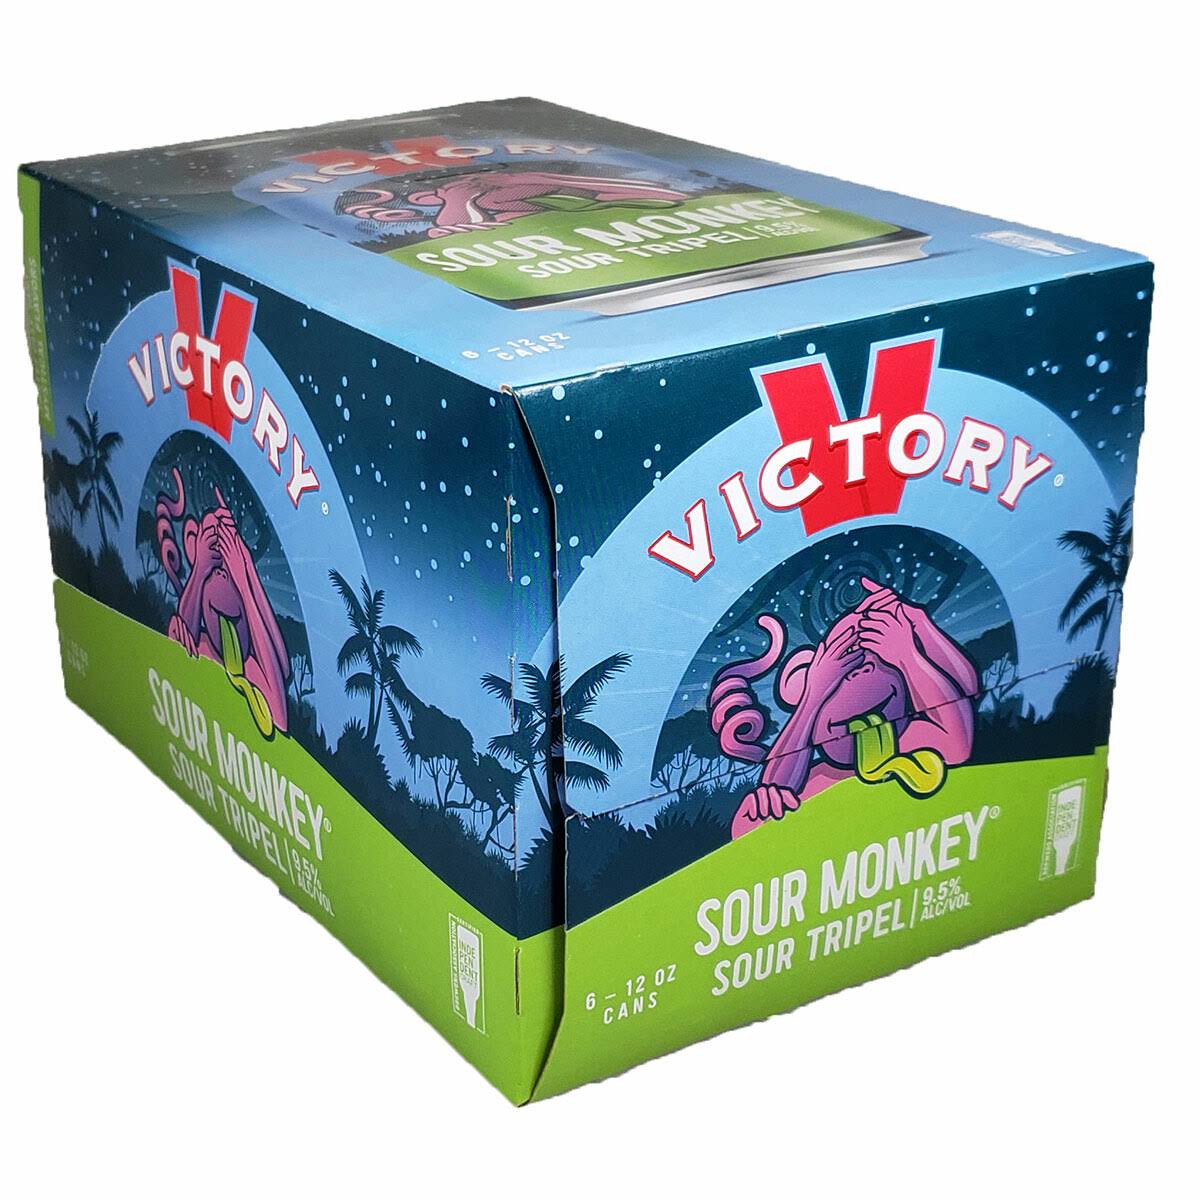 Victory Beer, Sour Monkey - 6 pack, 12 oz cans